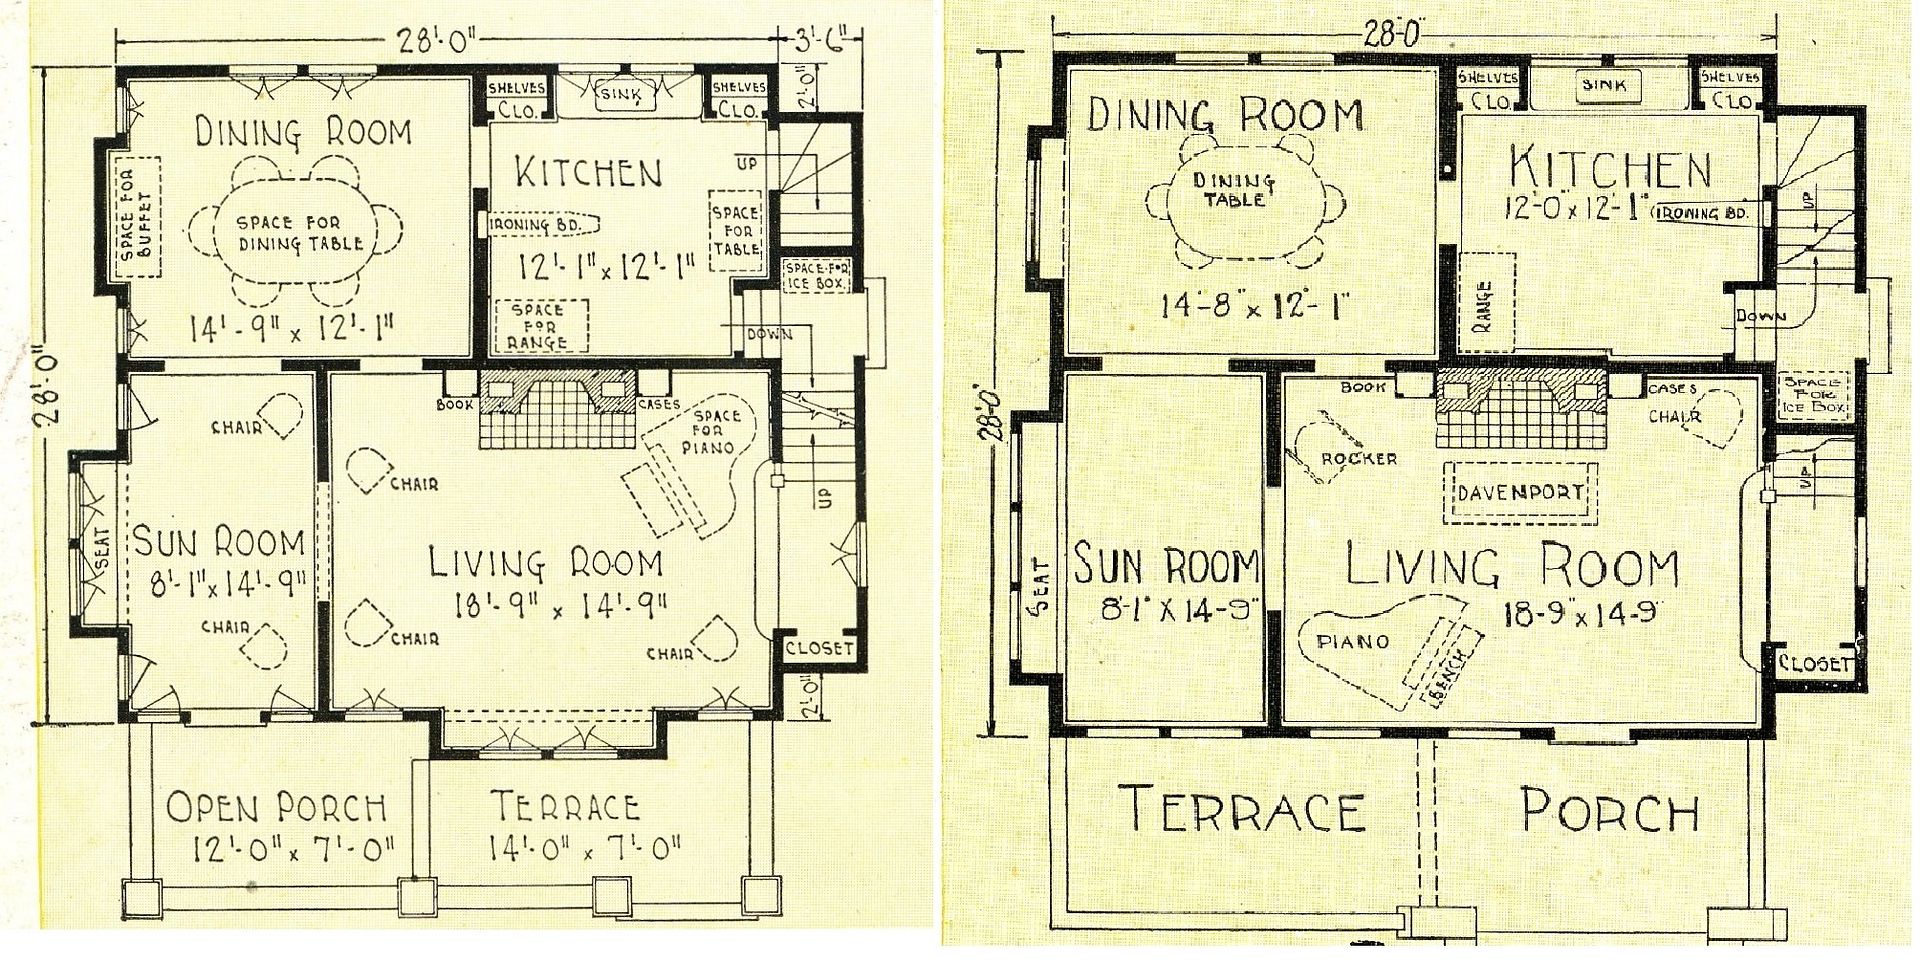 A side-by-side comparison of the two floor plans show some minor differences of the two houses. 